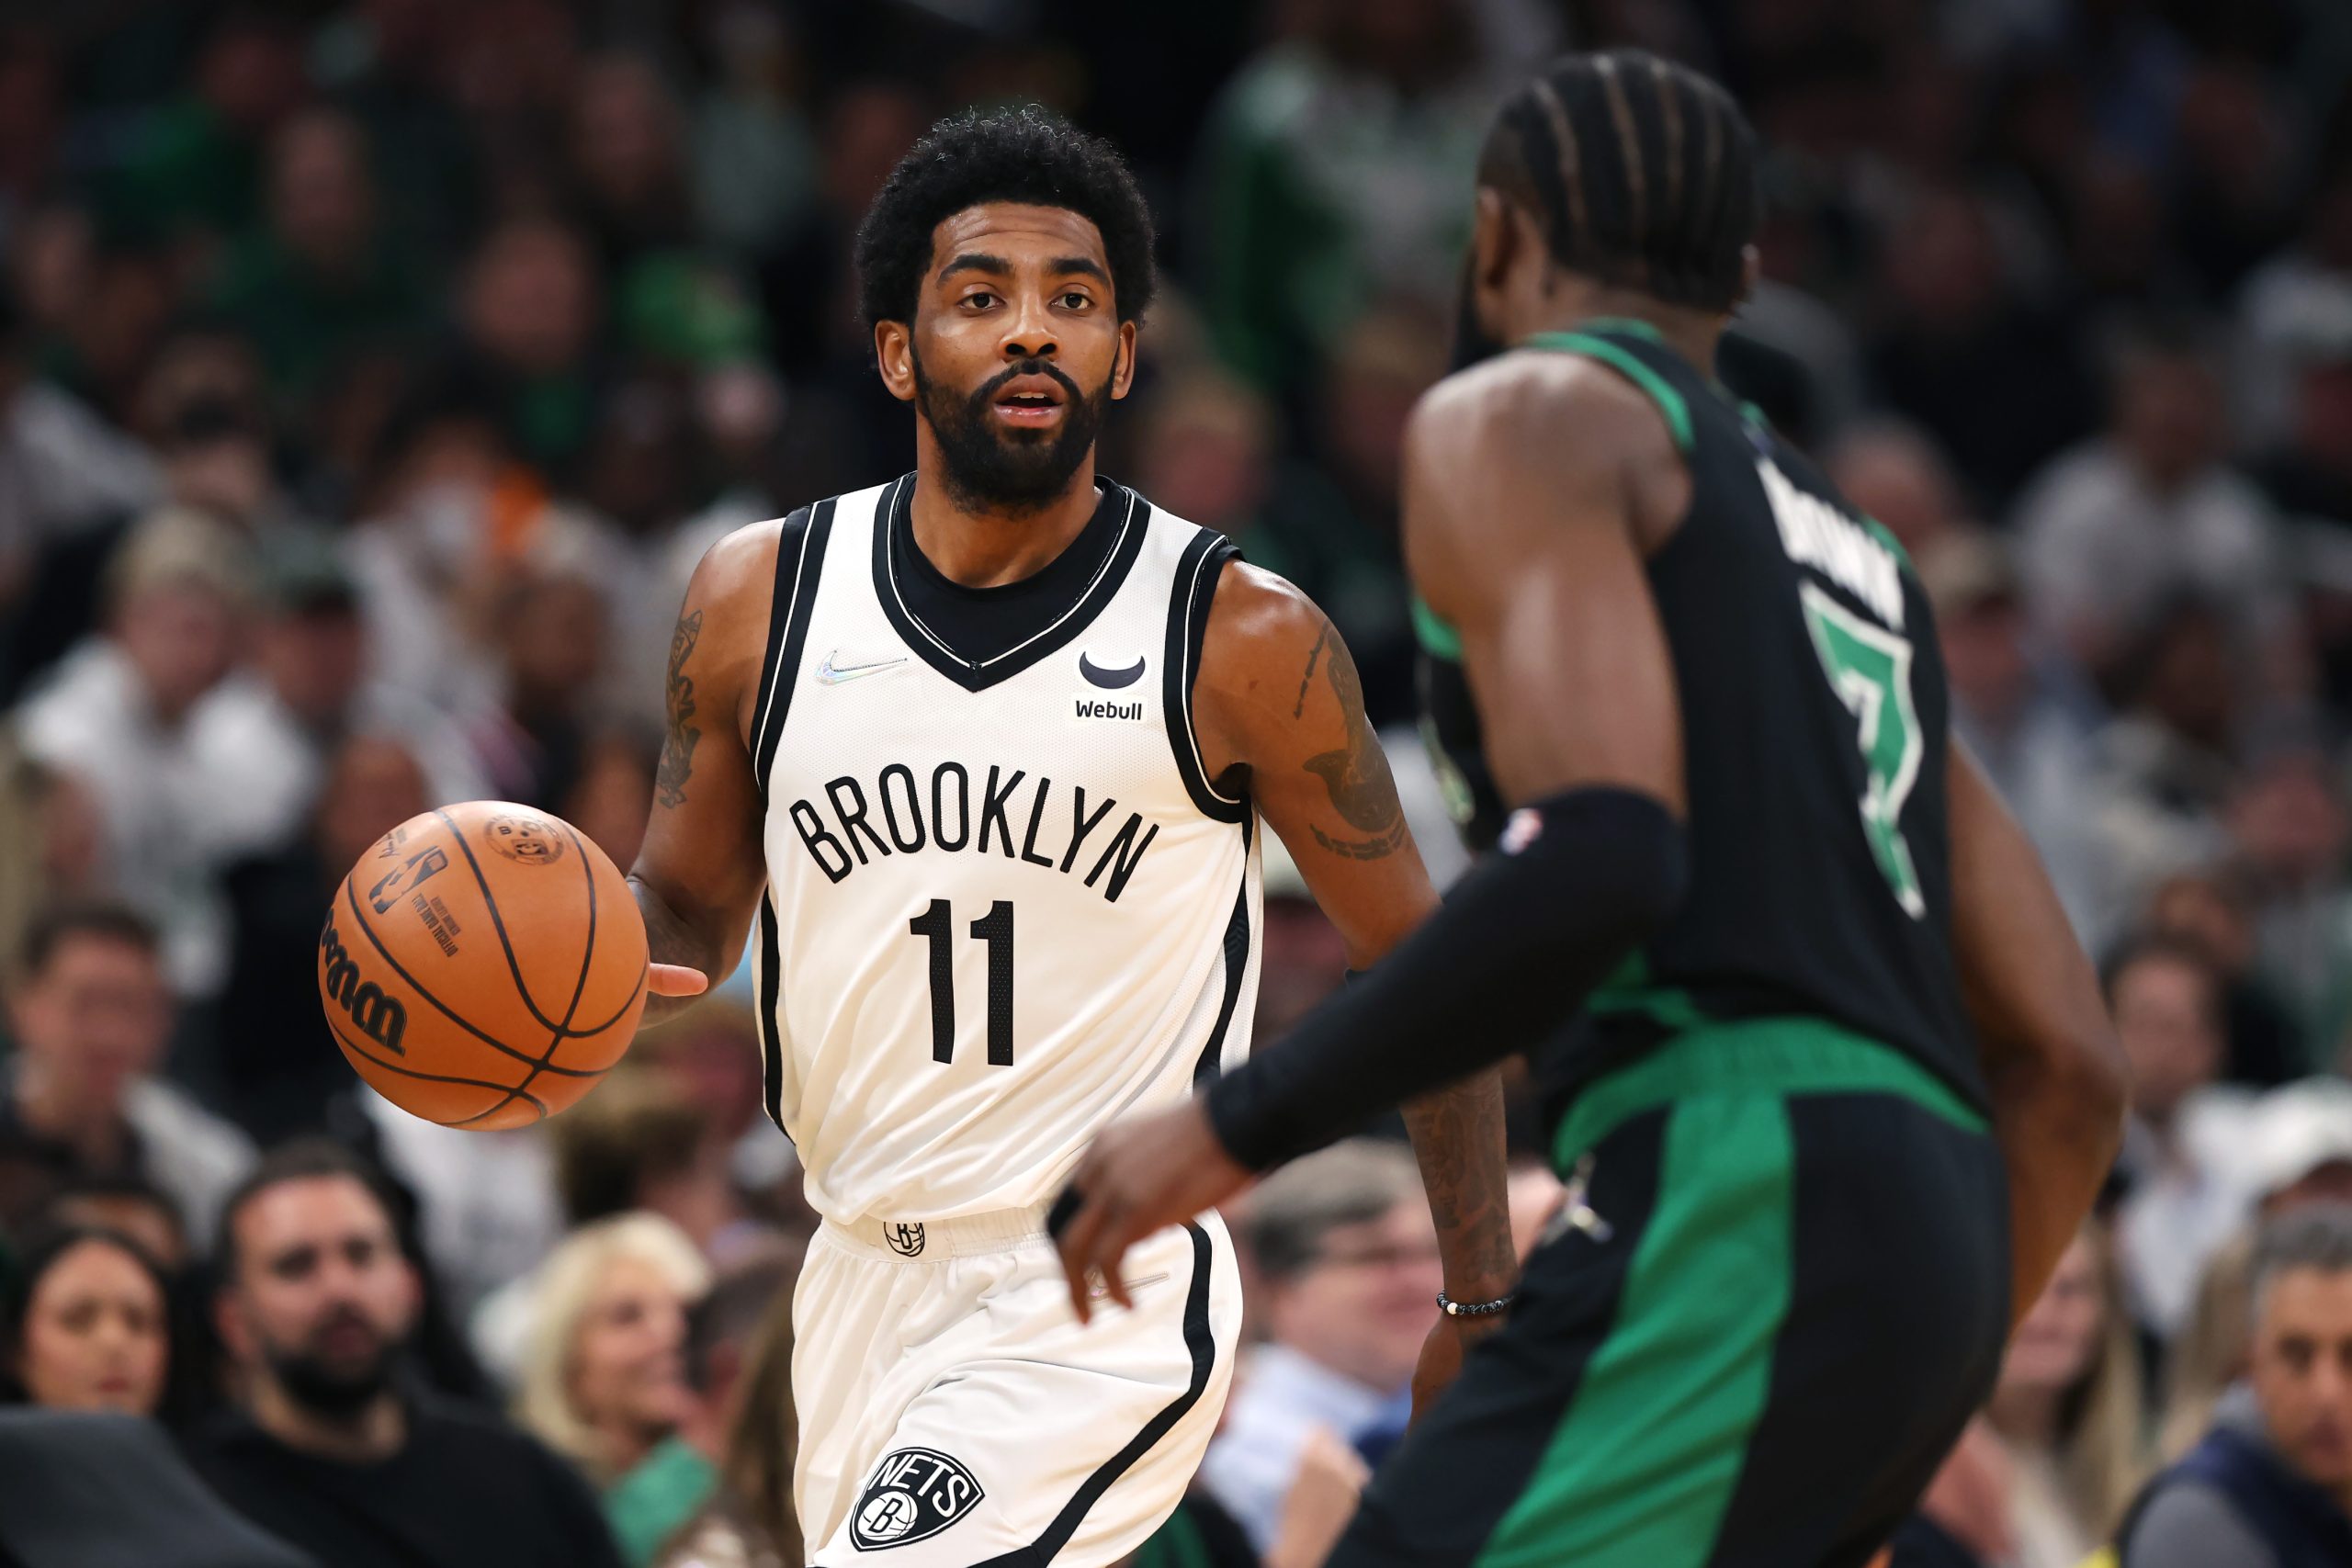 Could Kyrie Irving Be Barred From Playing Home Games? - InsideHook